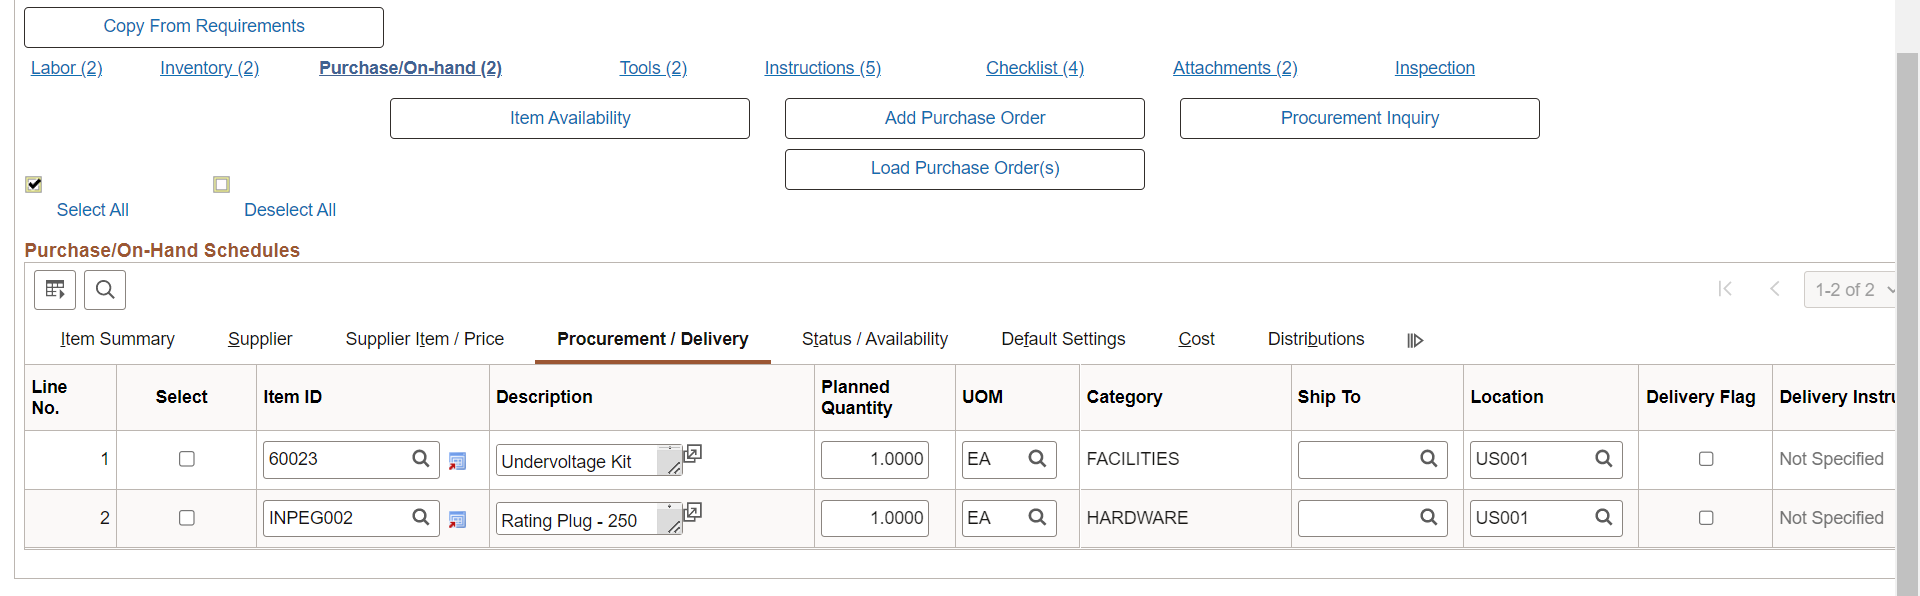 Purchase/On-Hand Schedules - Procurement/Delivery Tab